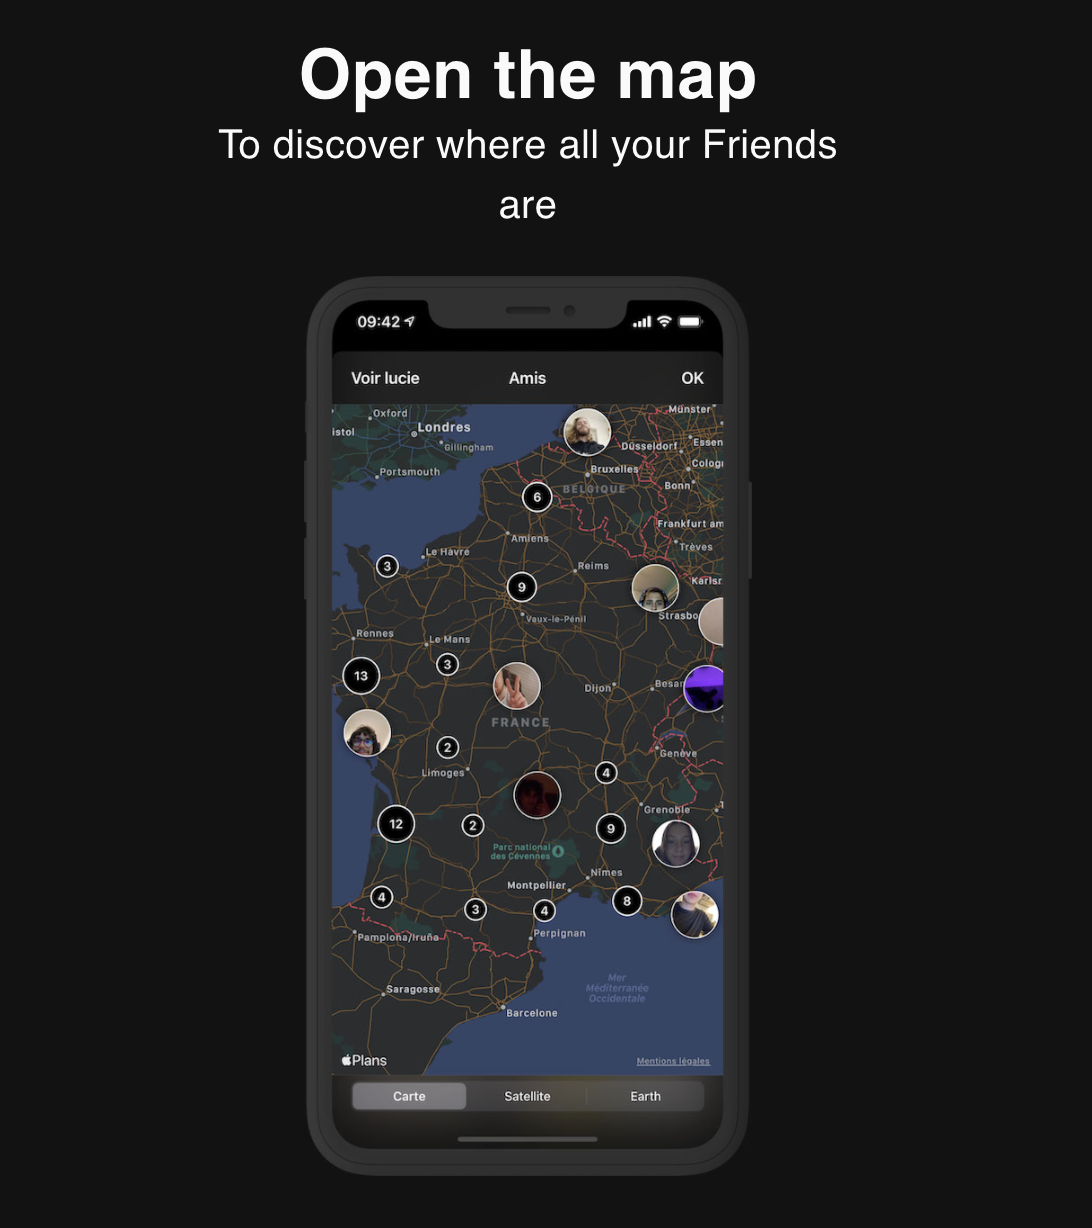 The map option on the app.